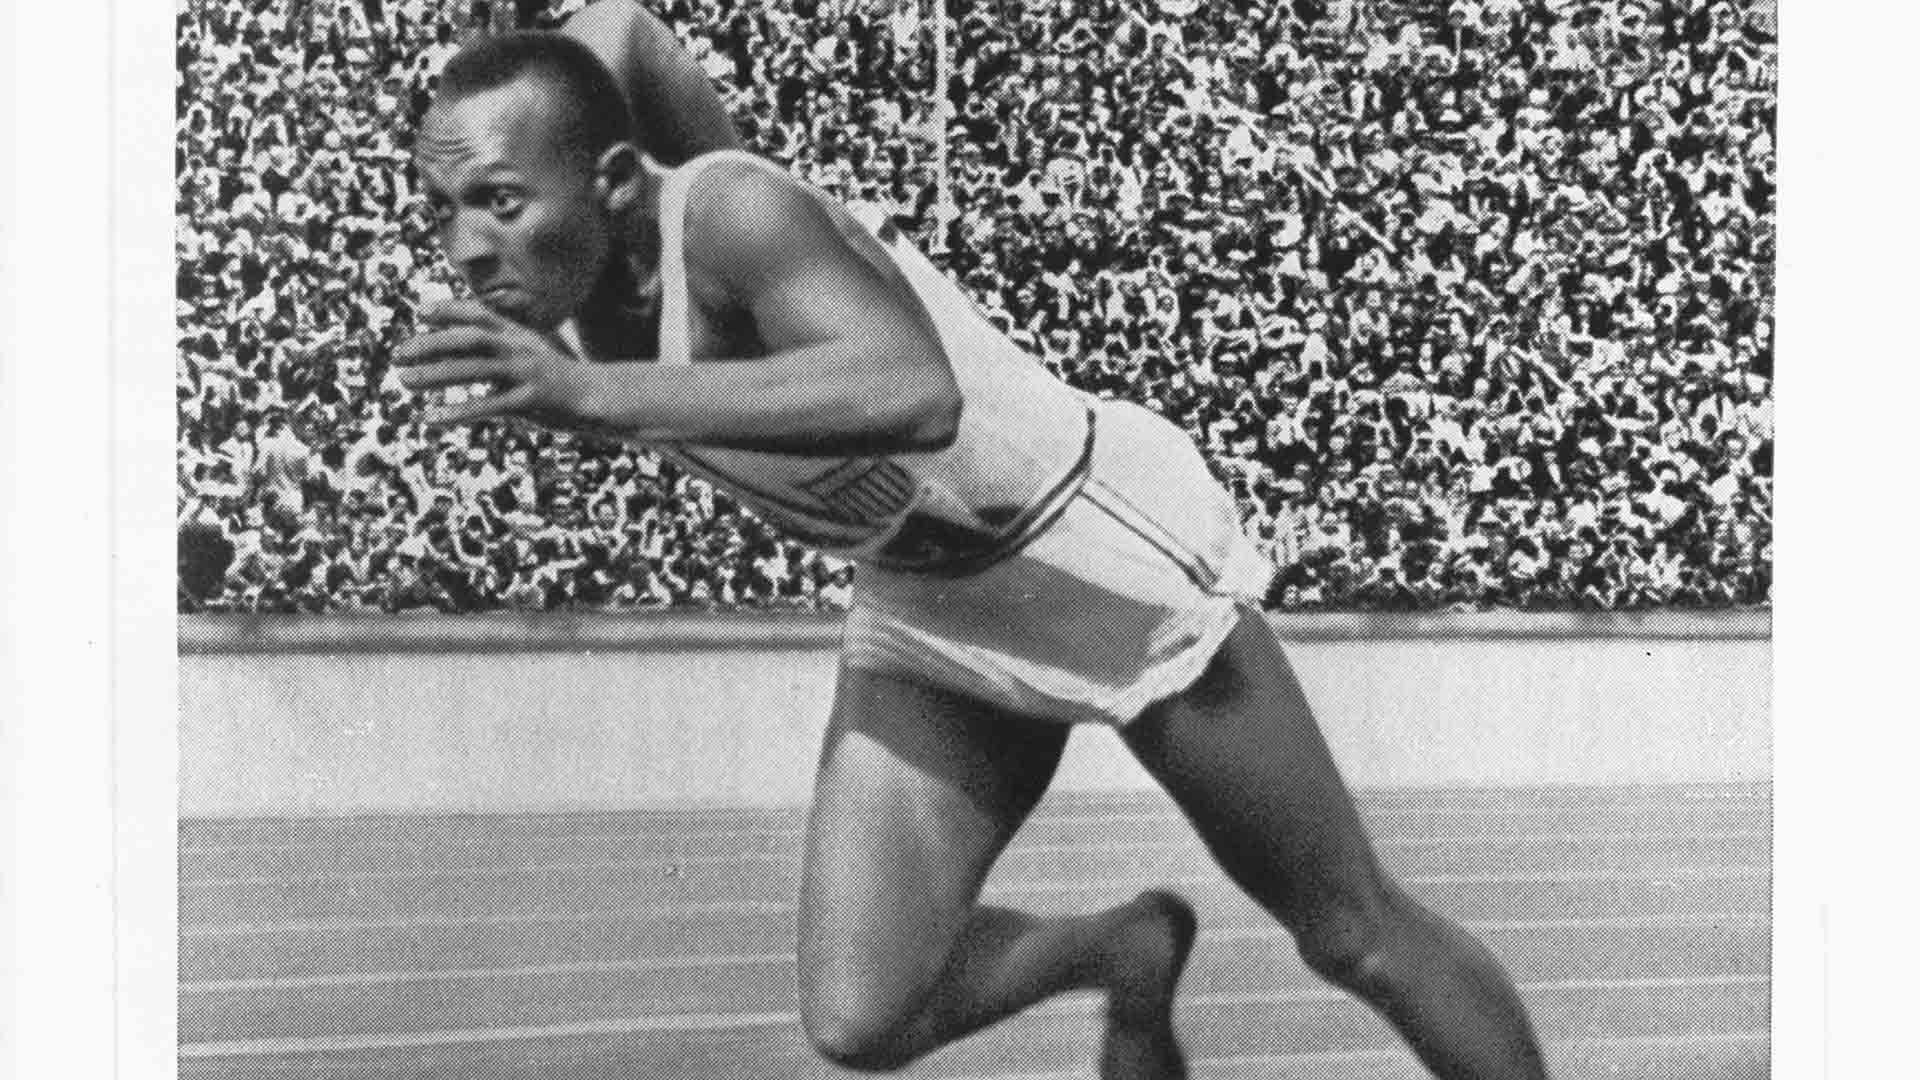 Jesse Owens at start of record-breaking 200-meter race, 1936.